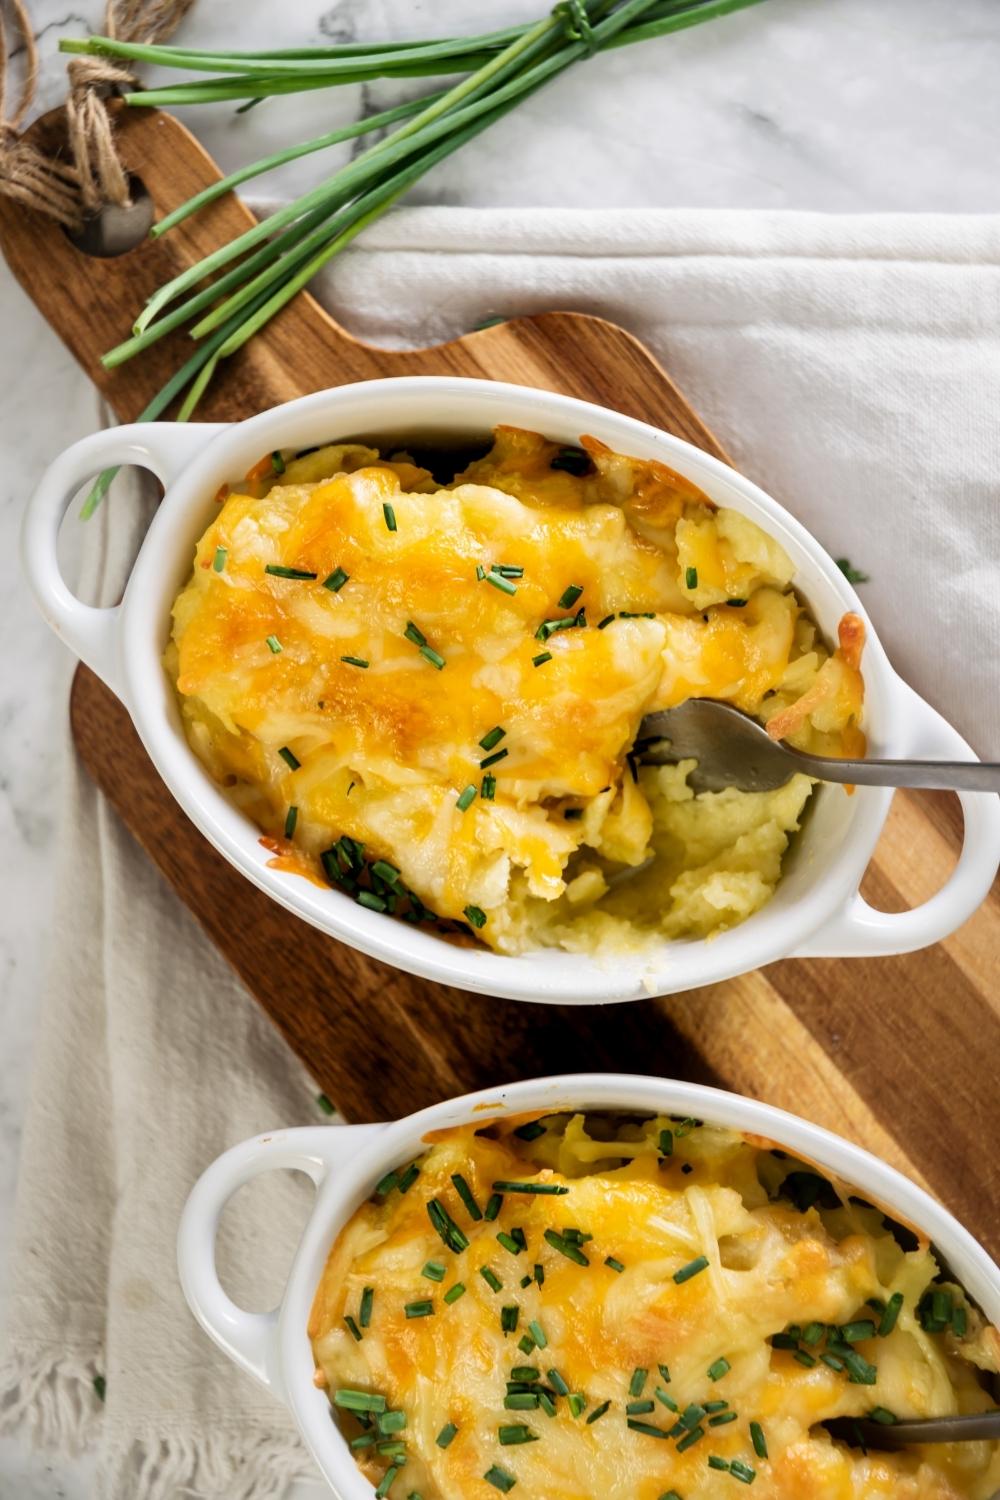 Cheesy mashed potatoes in a white casserole dish on a wooden cutting board. There is another casserole dish with the mashed potatoes in it in front of it.